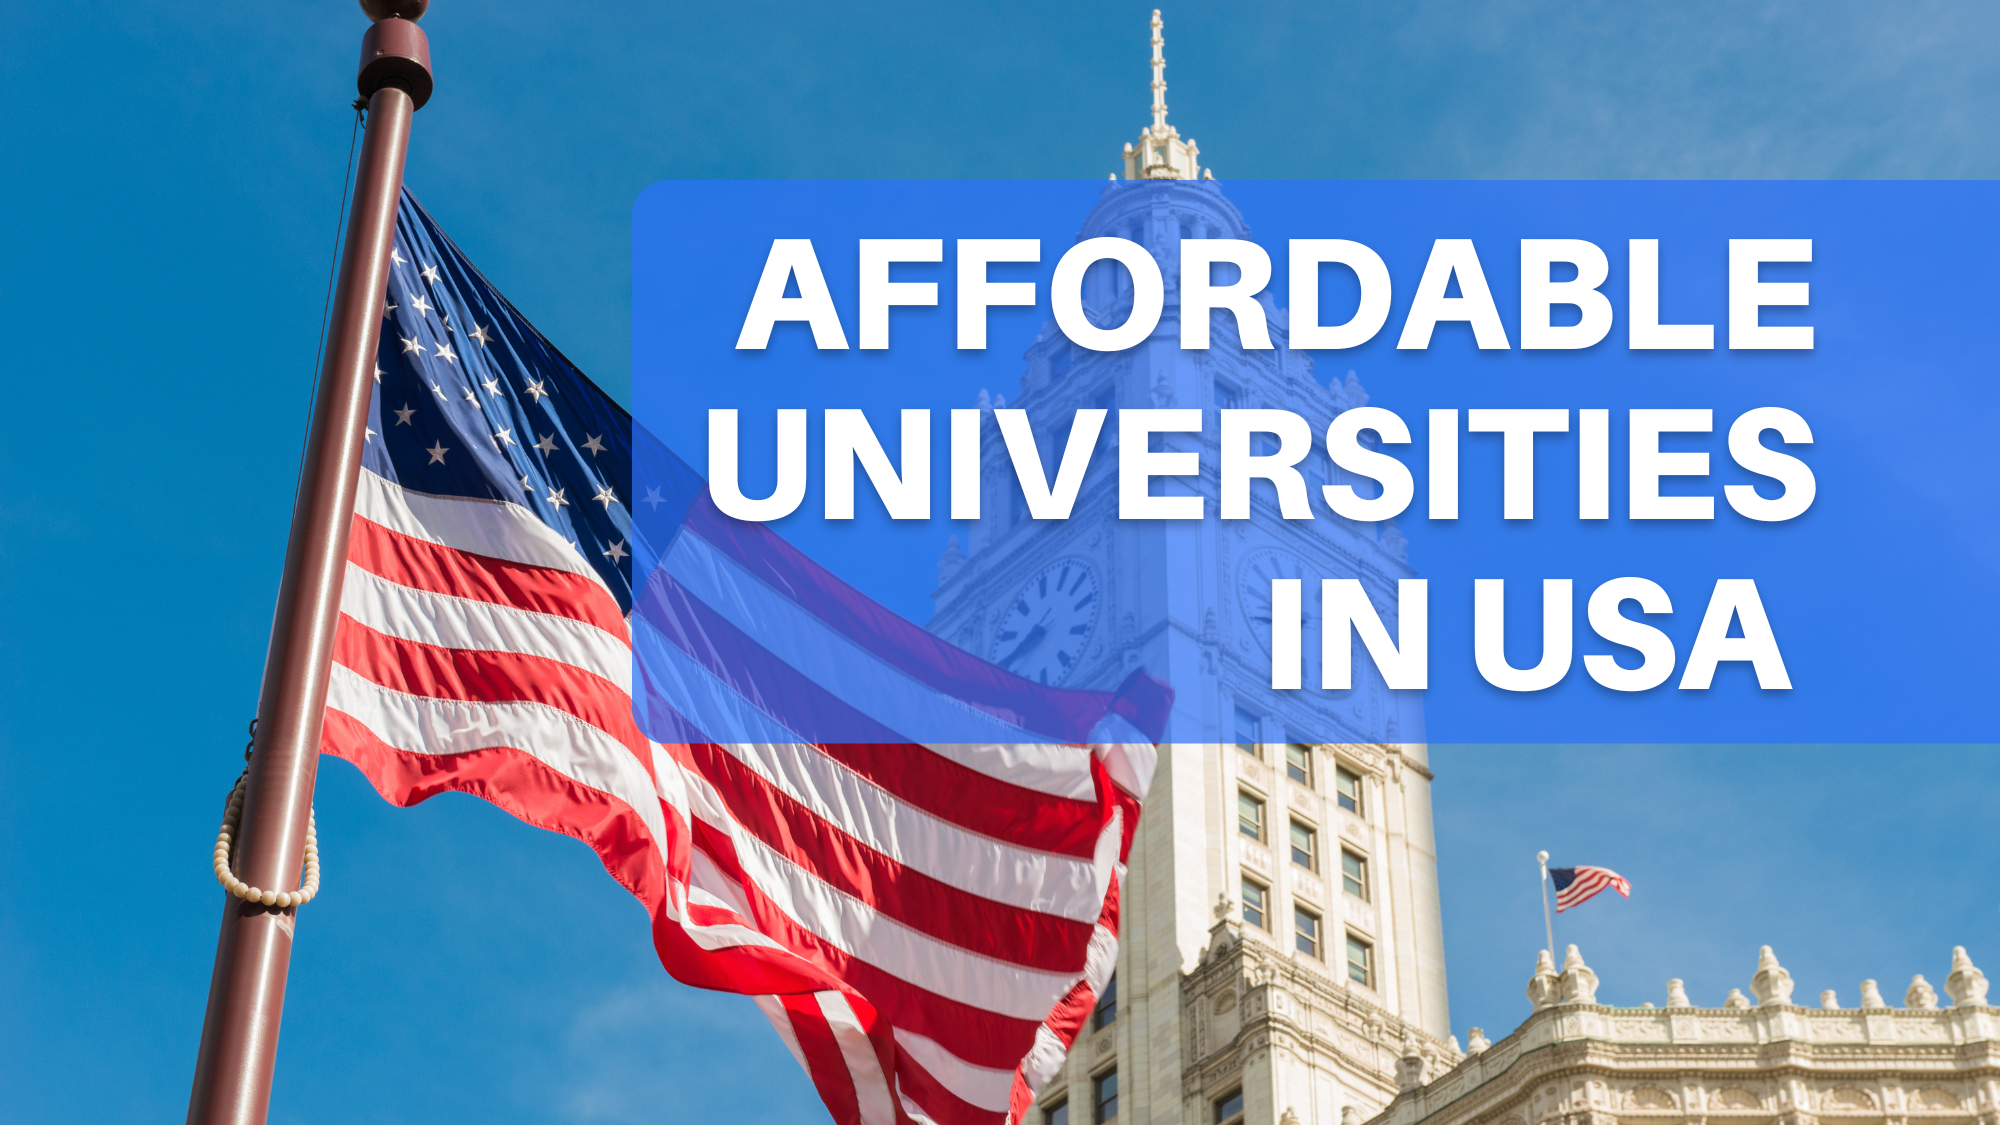 Affordable universities in USA 